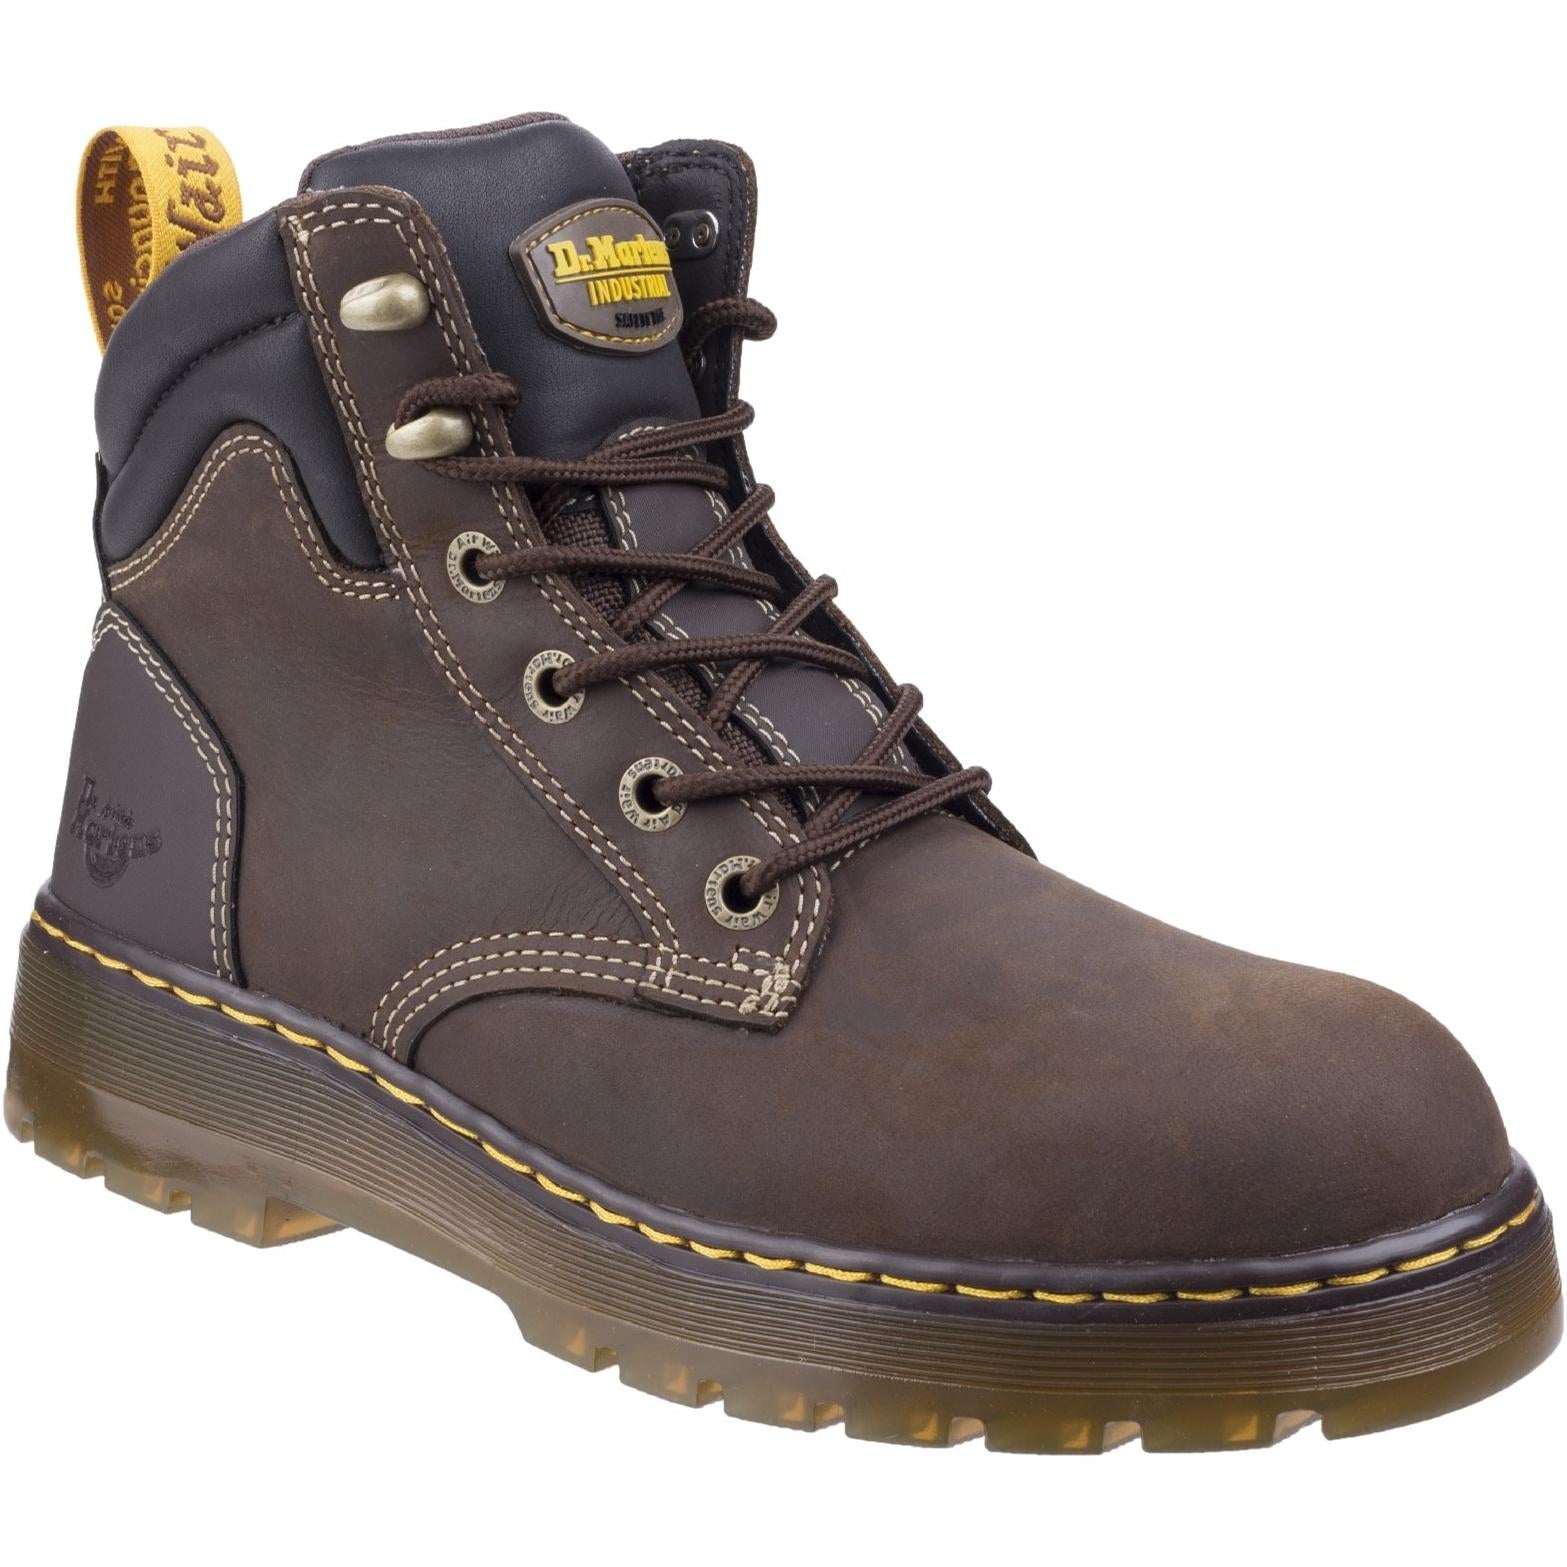 Dr Martens Brace Hiking Style Safety Boot